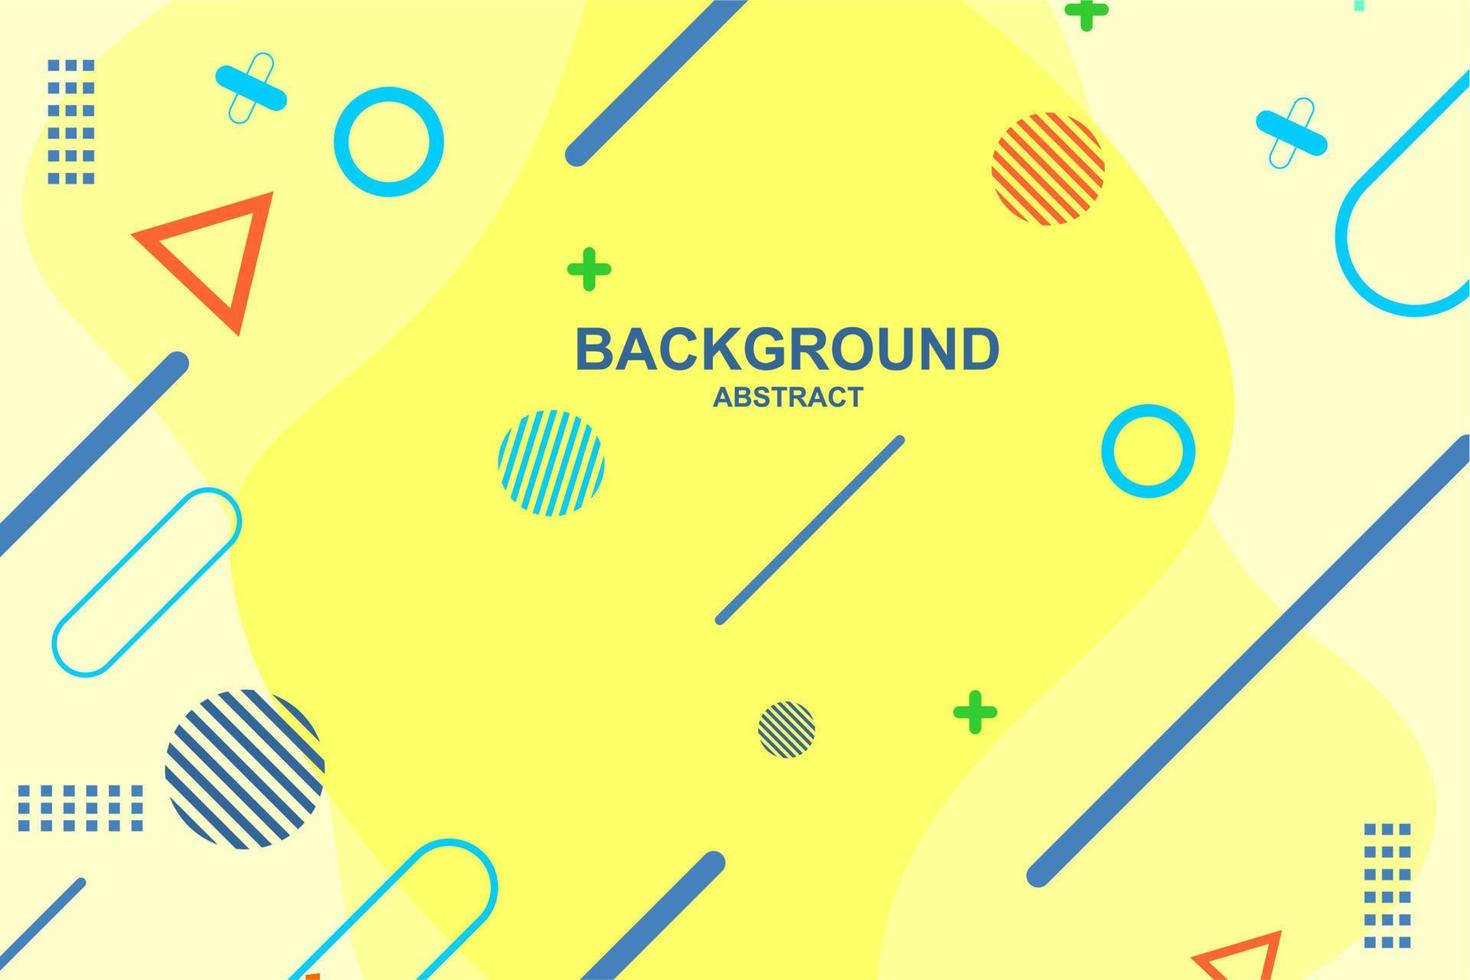 BACKGROUND ABSTRACT. GEOMETRY DESIGN STYLE, SIMPLE DESIGN vector